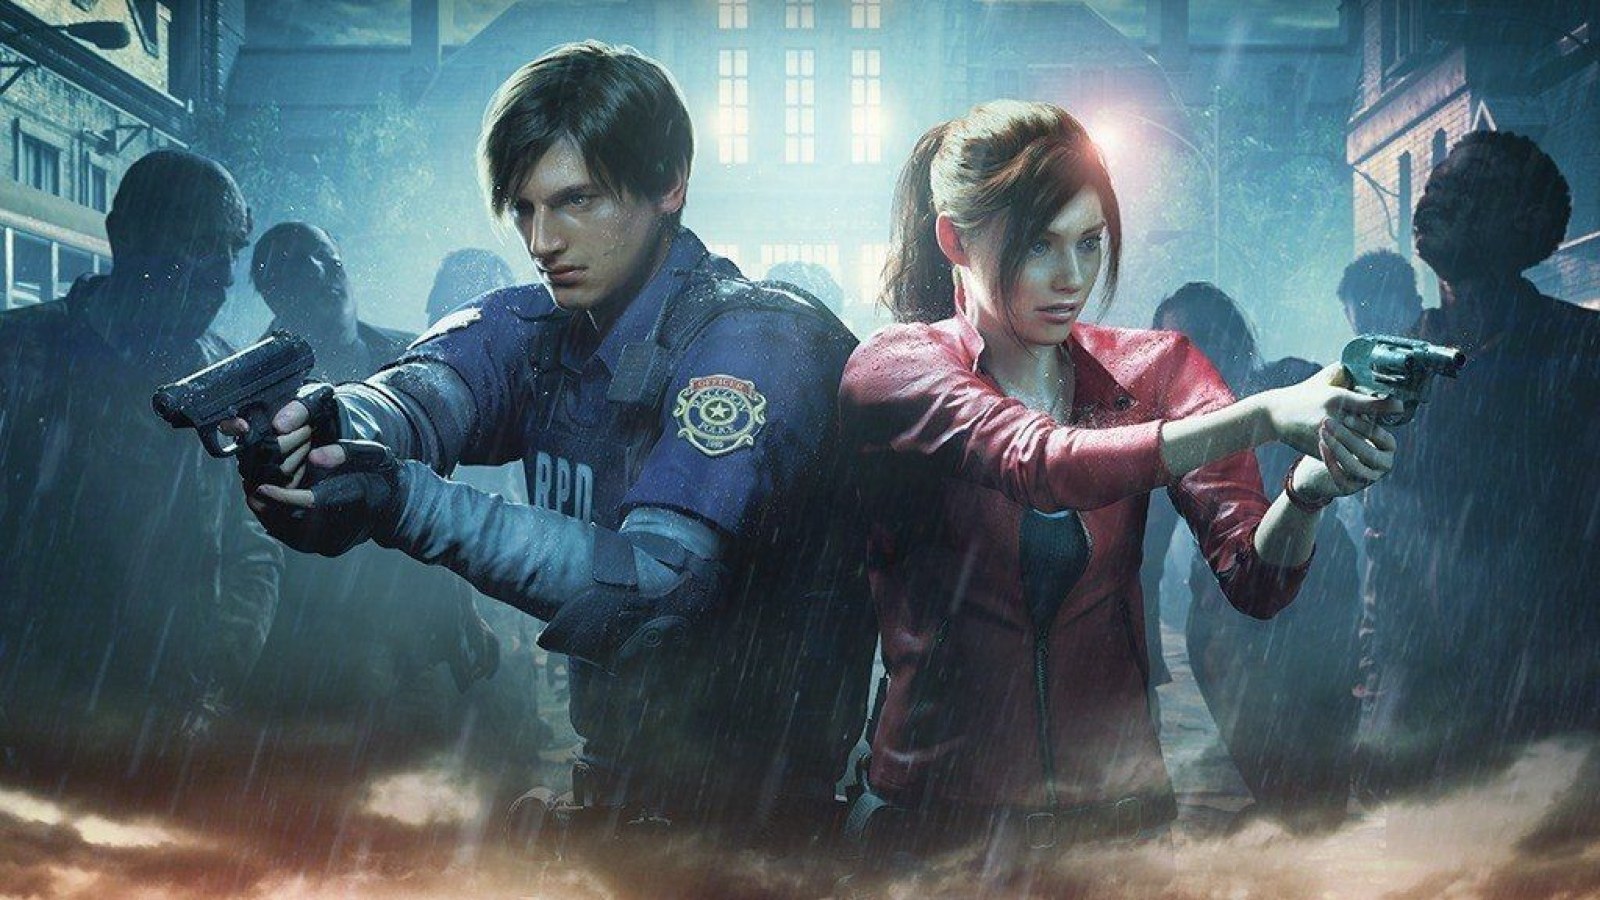 After 20 Years, Resident Evil 2 is Still Un-Alive in Our Hearts